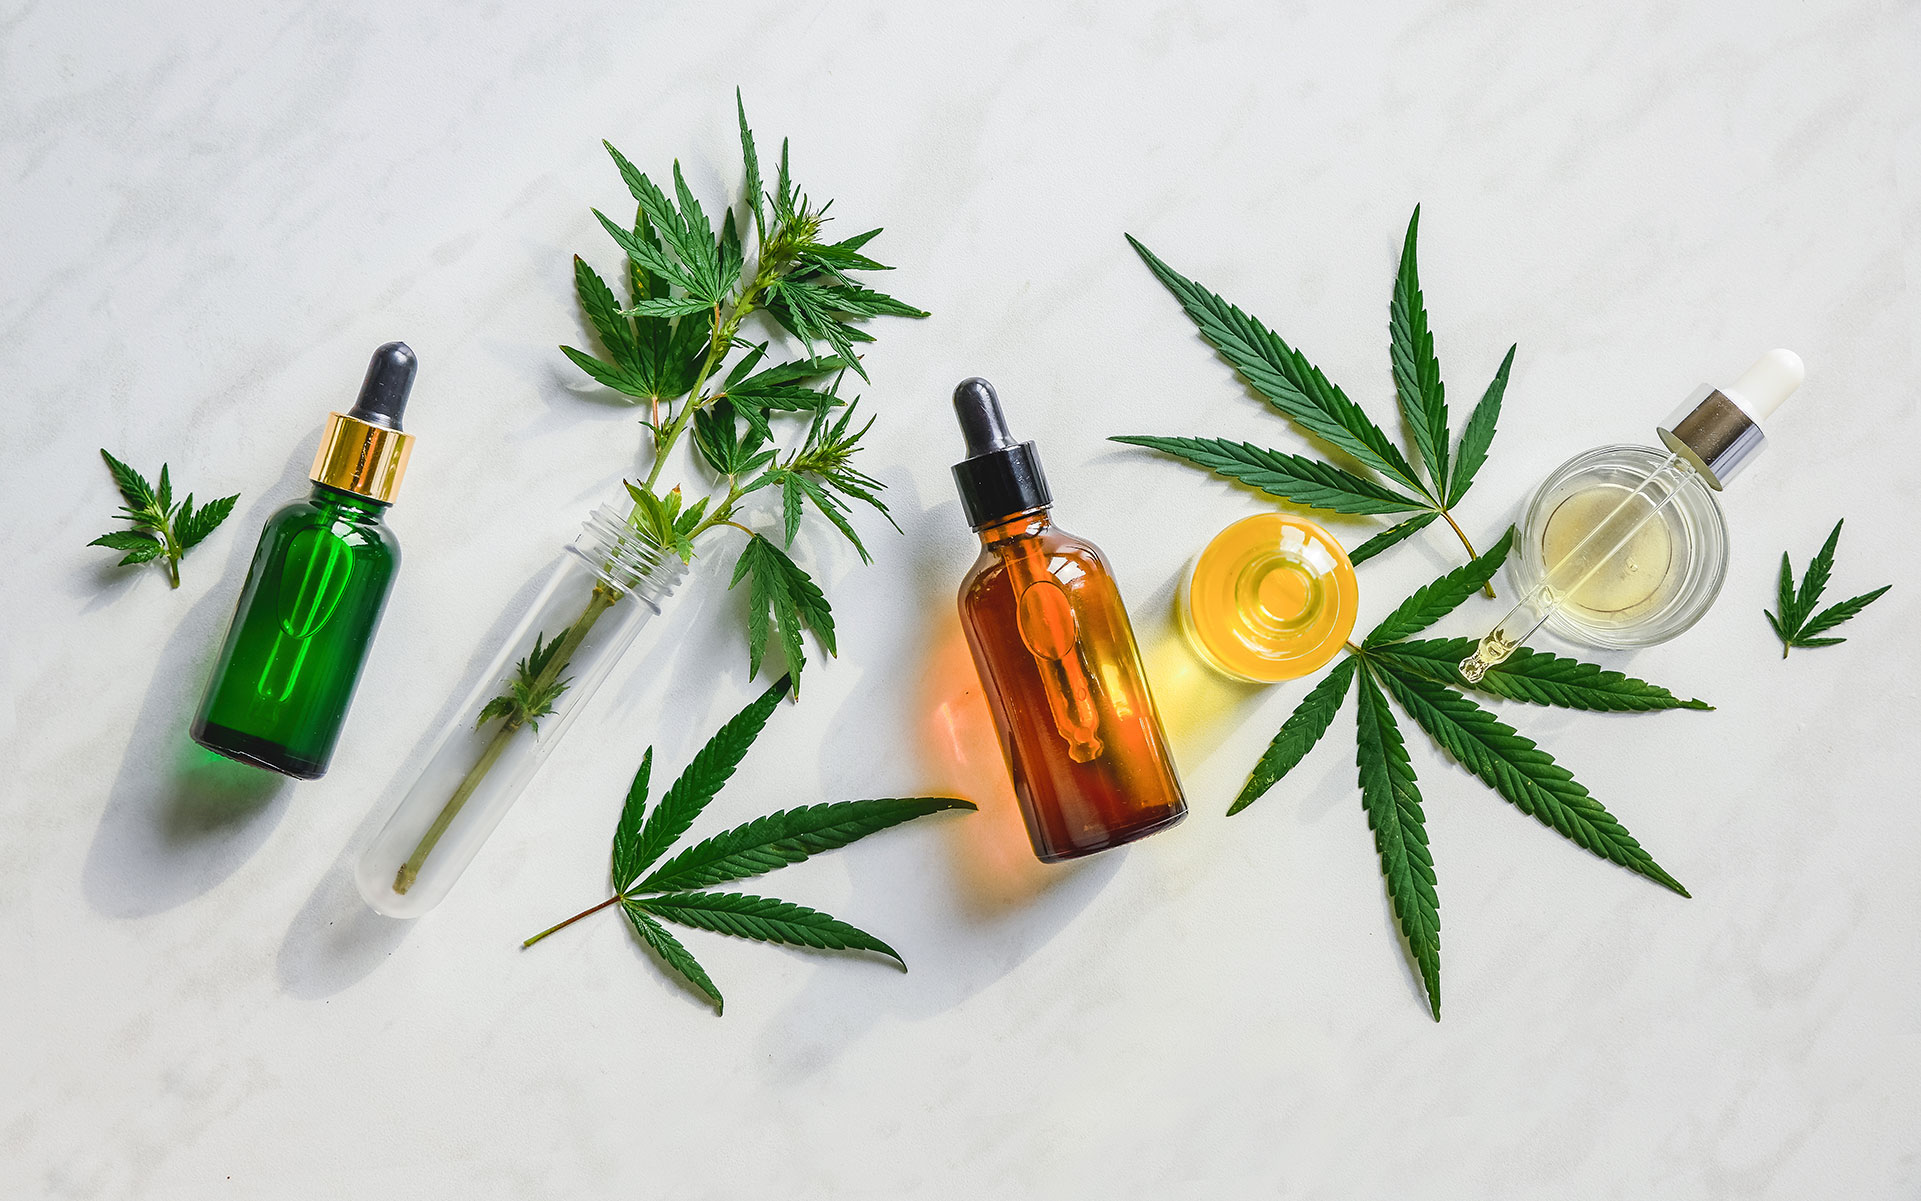 How Much Cbd Oil Should Be Taken To Remain Calm - Cbd|Oil|Cannabidiol|Products|View|Abstract|Effects|Hemp|Cannabis|Product|Thc|Pain|People|Health|Body|Plant|Cannabinoids|Medications|Oils|Drug|Benefits|System|Study|Marijuana|Anxiety|Side|Research|Effect|Liver|Quality|Treatment|Studies|Epilepsy|Symptoms|Gummies|Compounds|Dose|Time|Inflammation|Bottle|Cbd Oil|View Abstract|Side Effects|Cbd Products|Endocannabinoid System|Multiple Sclerosis|Cbd Oils|Cbd Gummies|Cannabis Plant|Hemp Oil|Cbd Product|Hemp Plant|United States|Cytochrome P450|Many People|Chronic Pain|Nuleaf Naturals|Royal Cbd|Full-Spectrum Cbd Oil|Drug Administration|Cbd Oil Products|Medical Marijuana|Drug Test|Heavy Metals|Clinical Trial|Clinical Trials|Cbd Oil Side|Rating Highlights|Wide Variety|Animal Studies